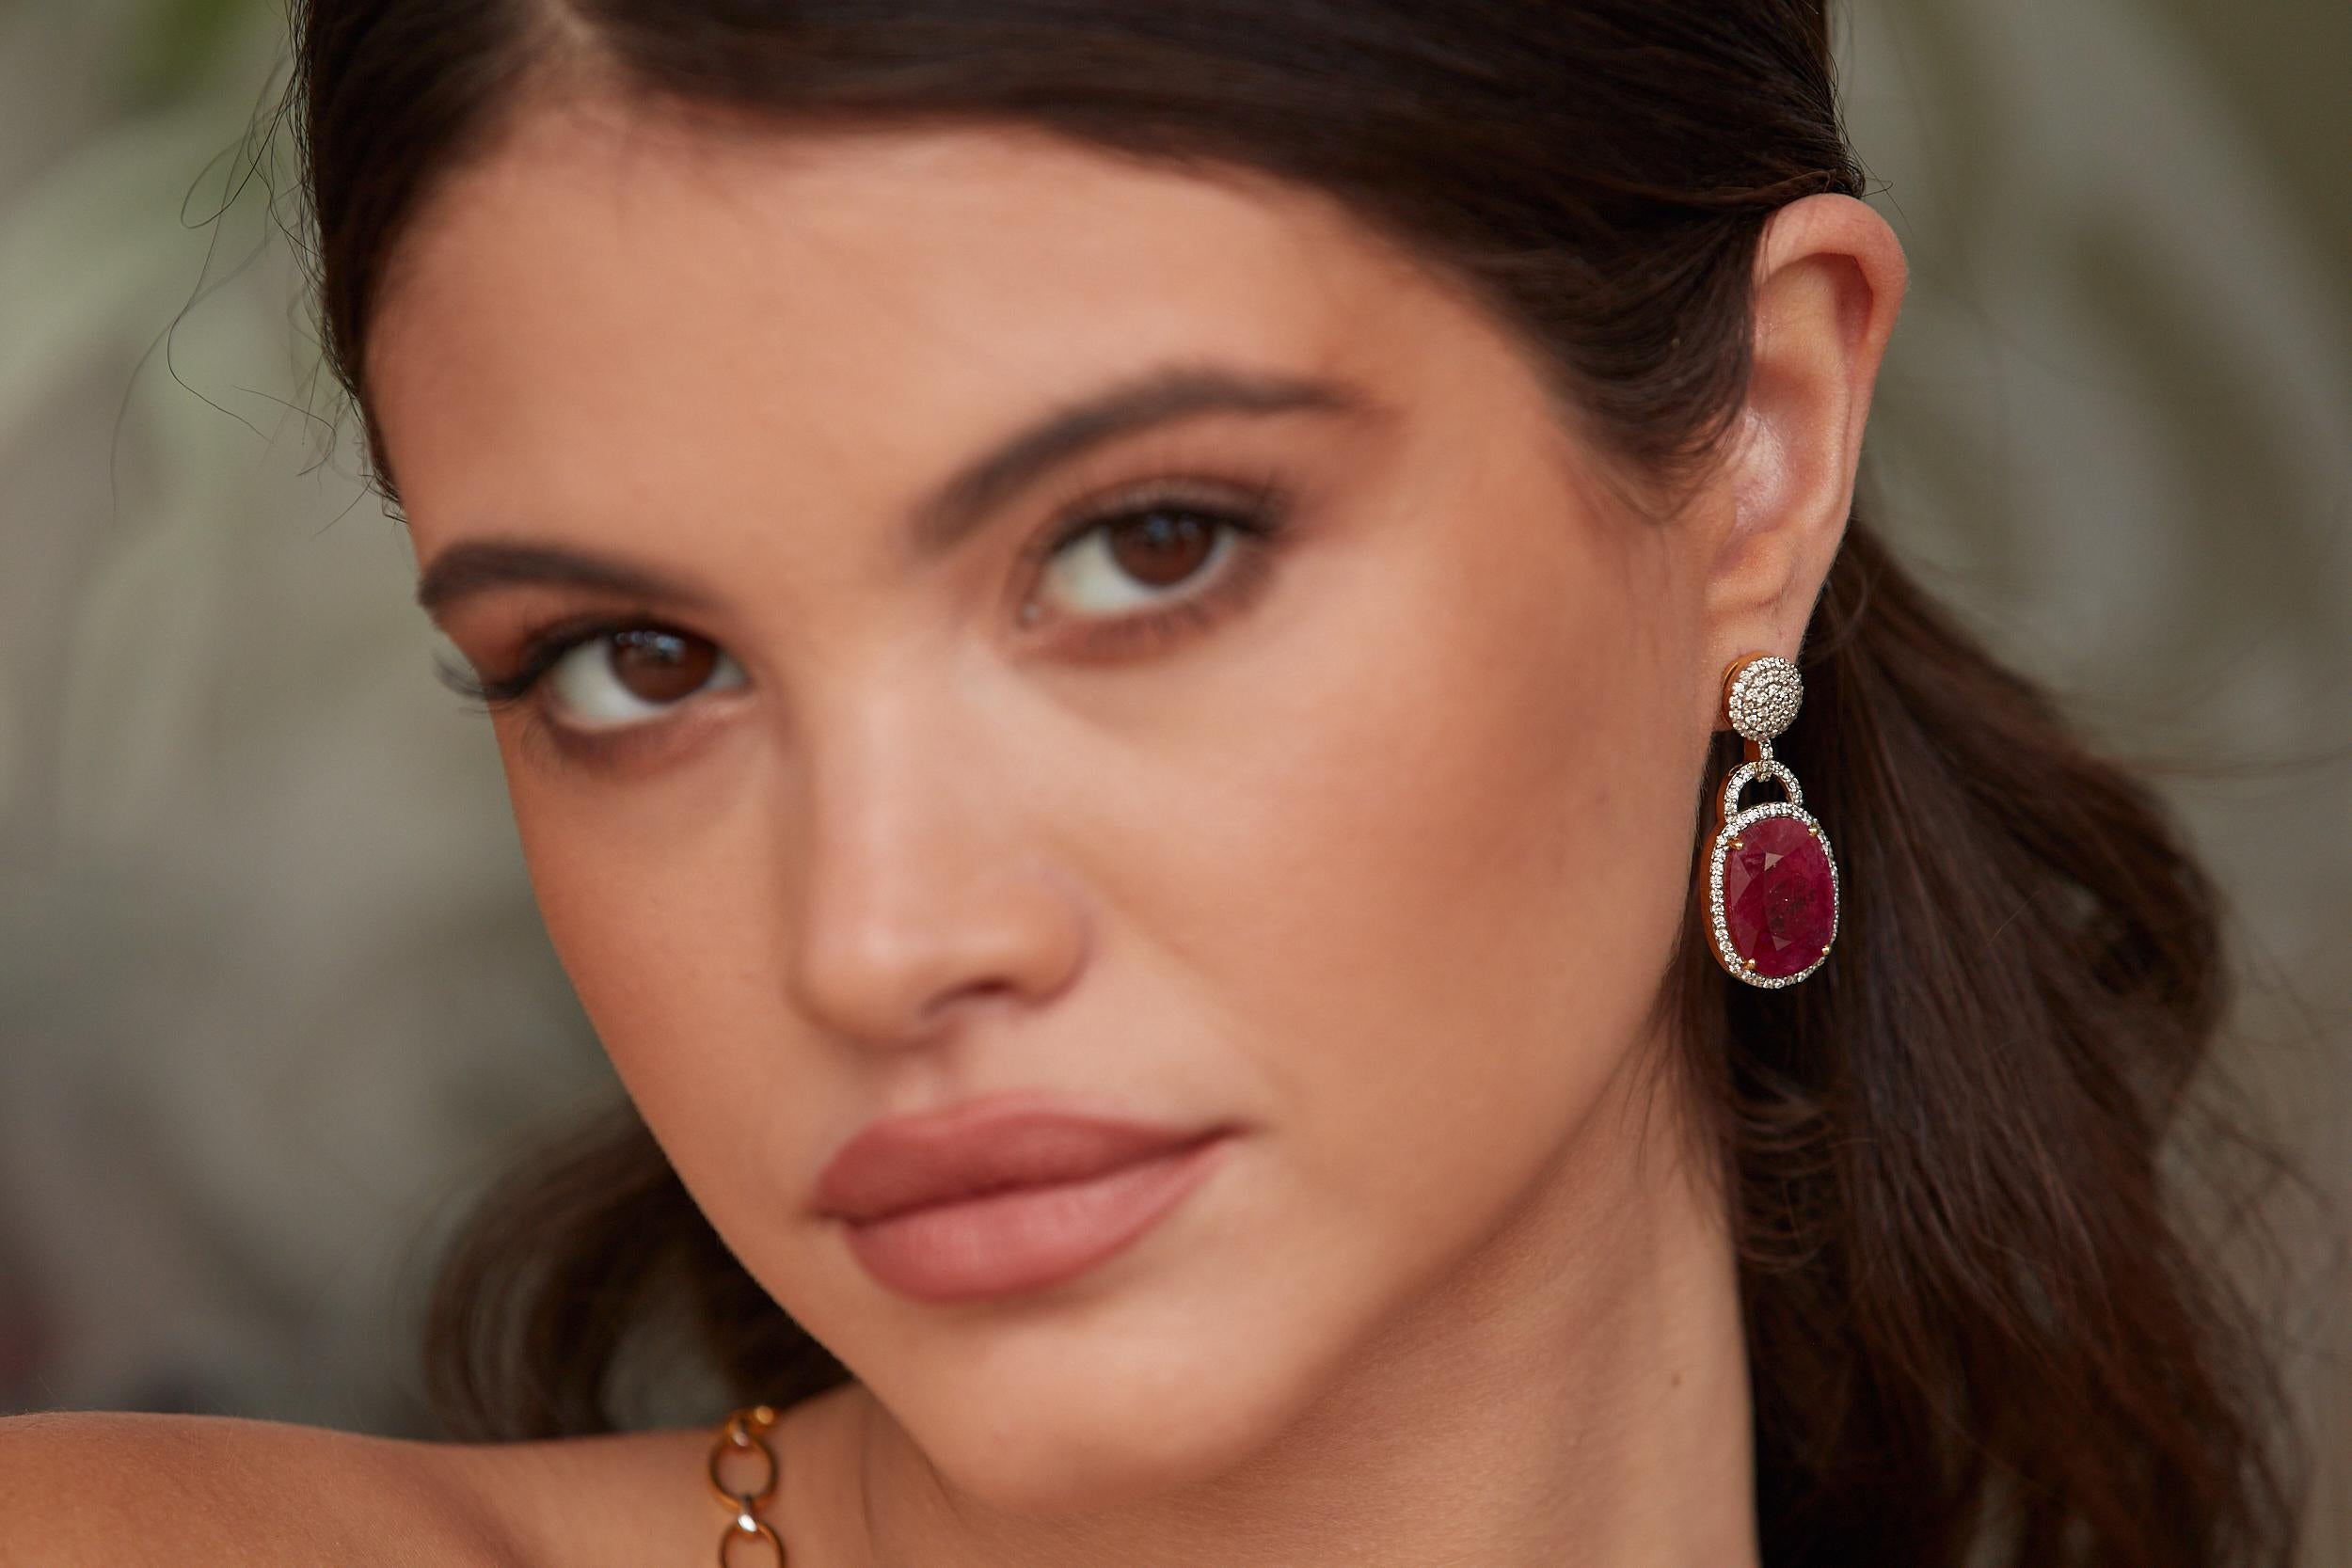 Tresor Diamond Earring features 0.79 cts diamond and 27.71 cts Ruby in 18k white gold. The Earring are an ode to the luxurious yet classic beauty with sparkly diamonds. Their contemporary and modern design makes them versatile in their use. The